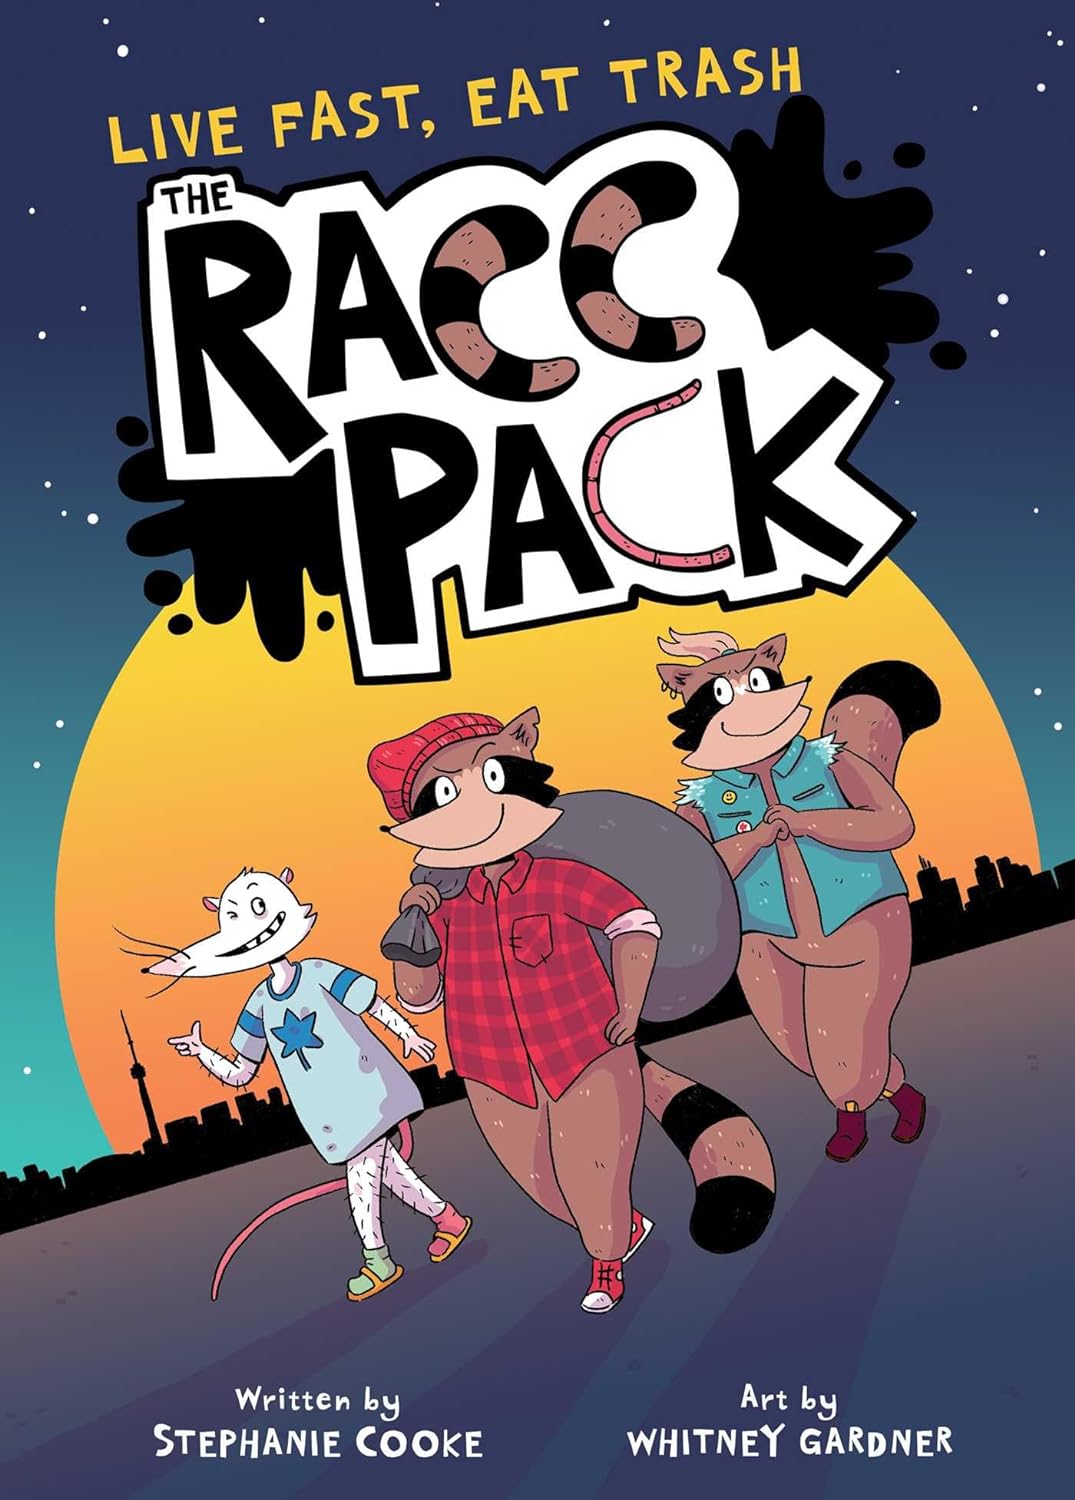 Image for "The Racc Pack"